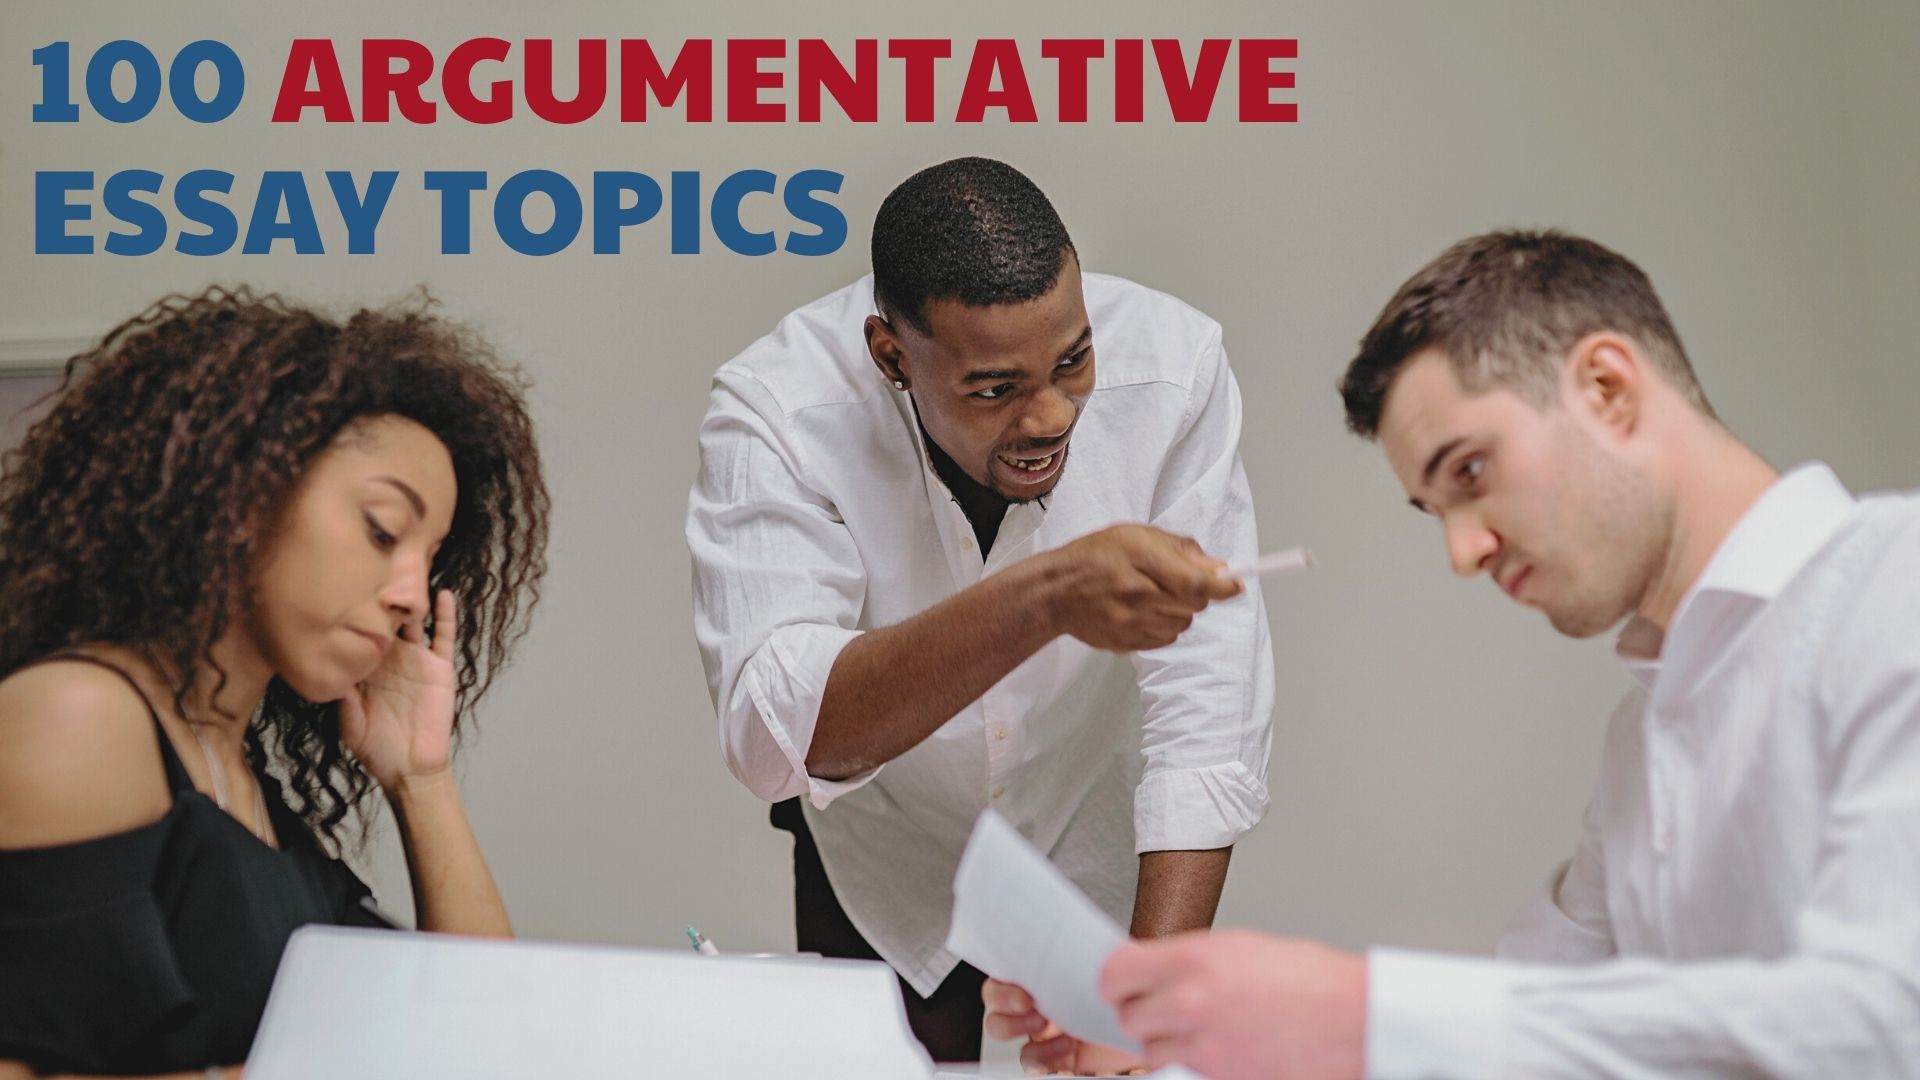 100 Argumentative Essay Topics for High School and College